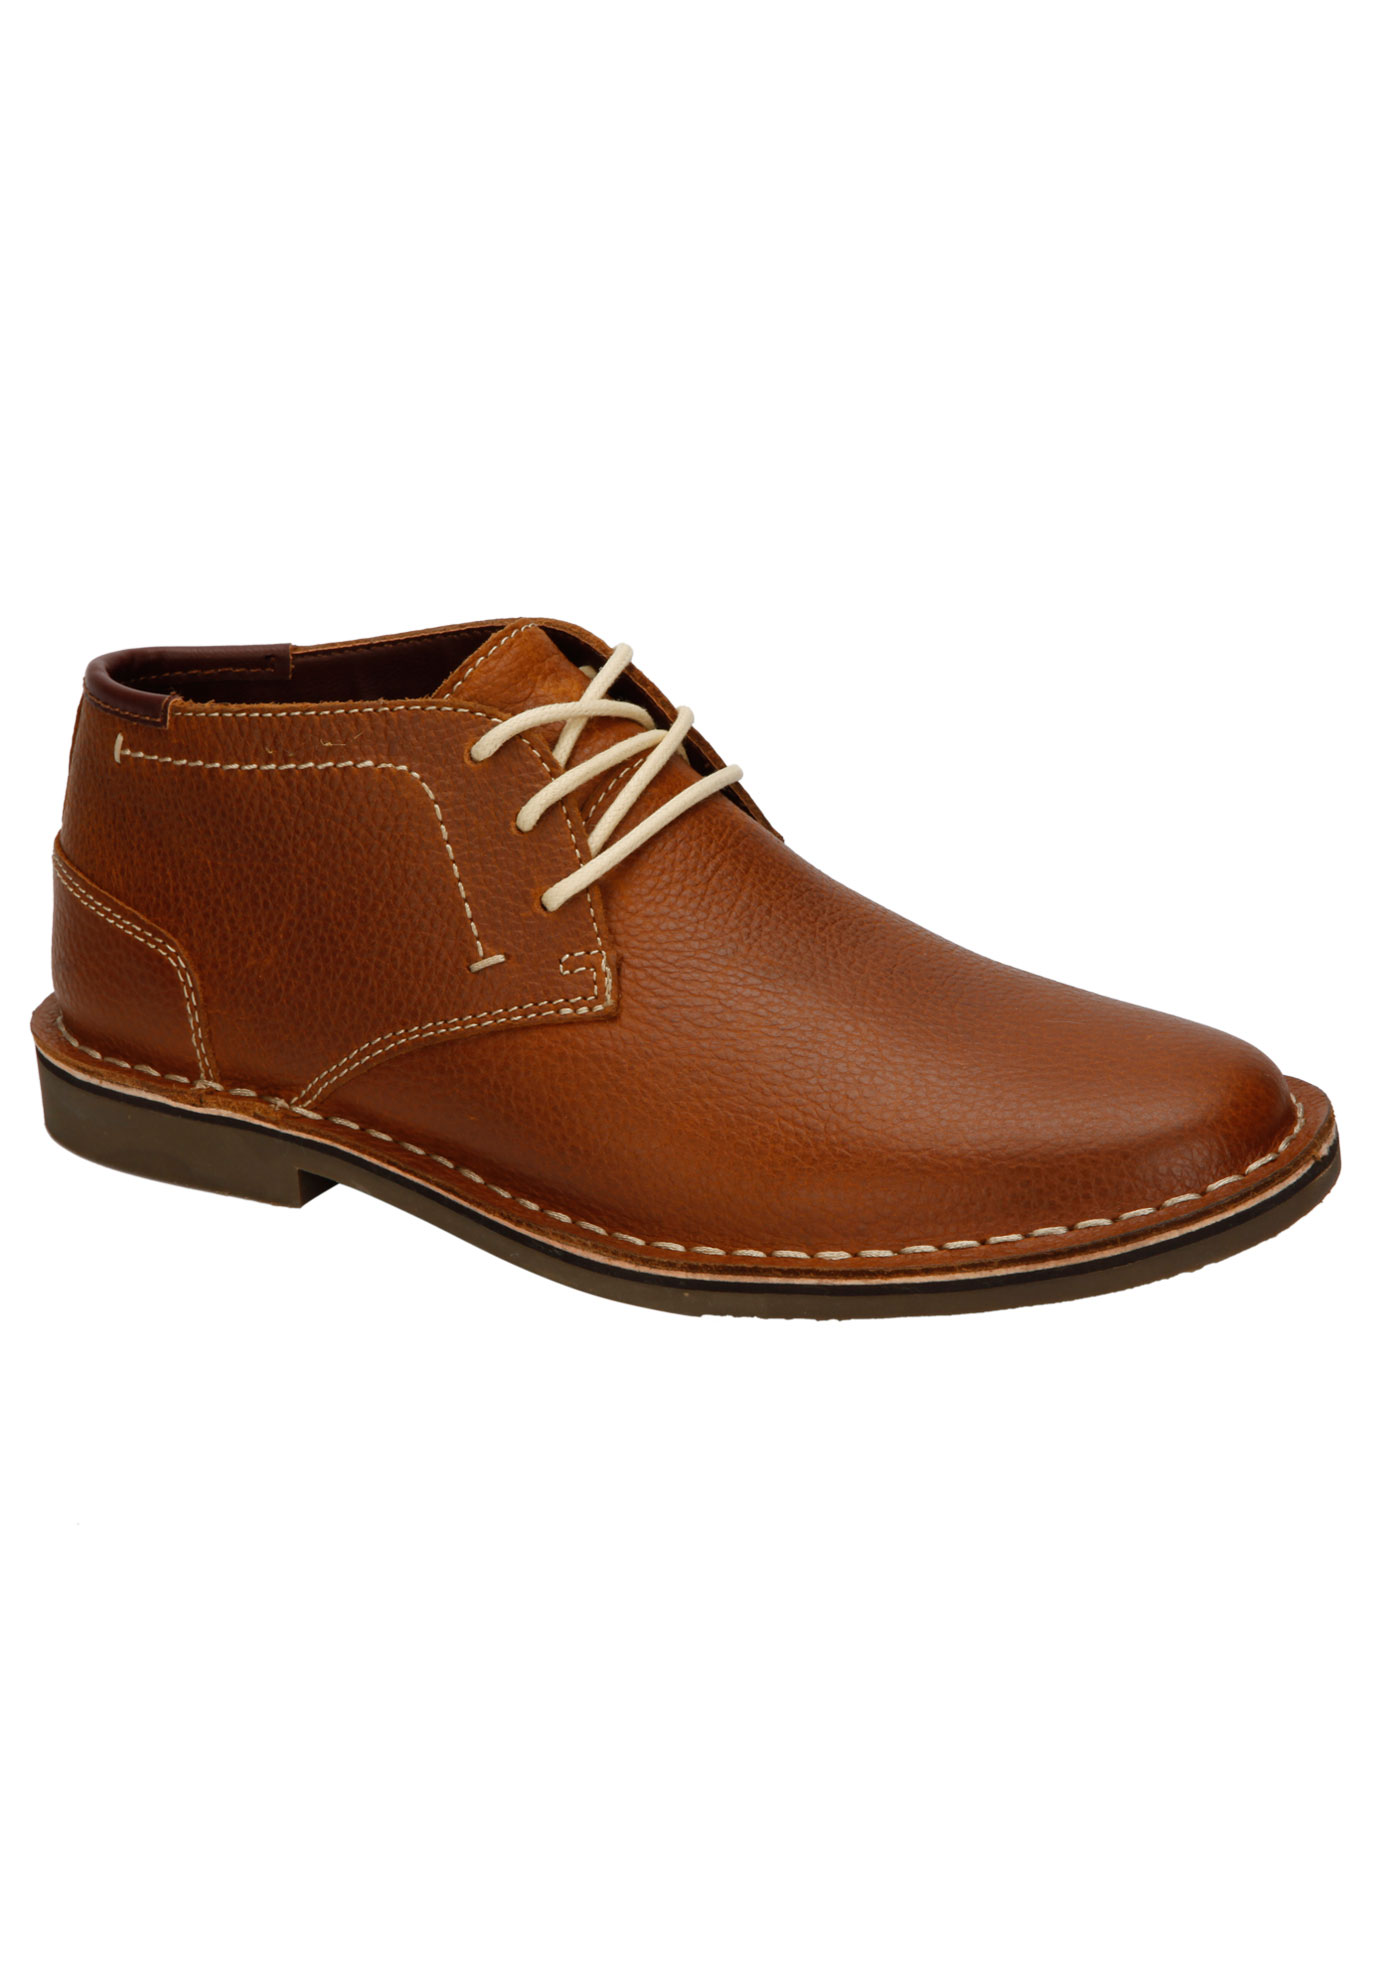 Desert Sun Suede Chukka Boot by Kenneth Cole®| Big and Tall Boots ...